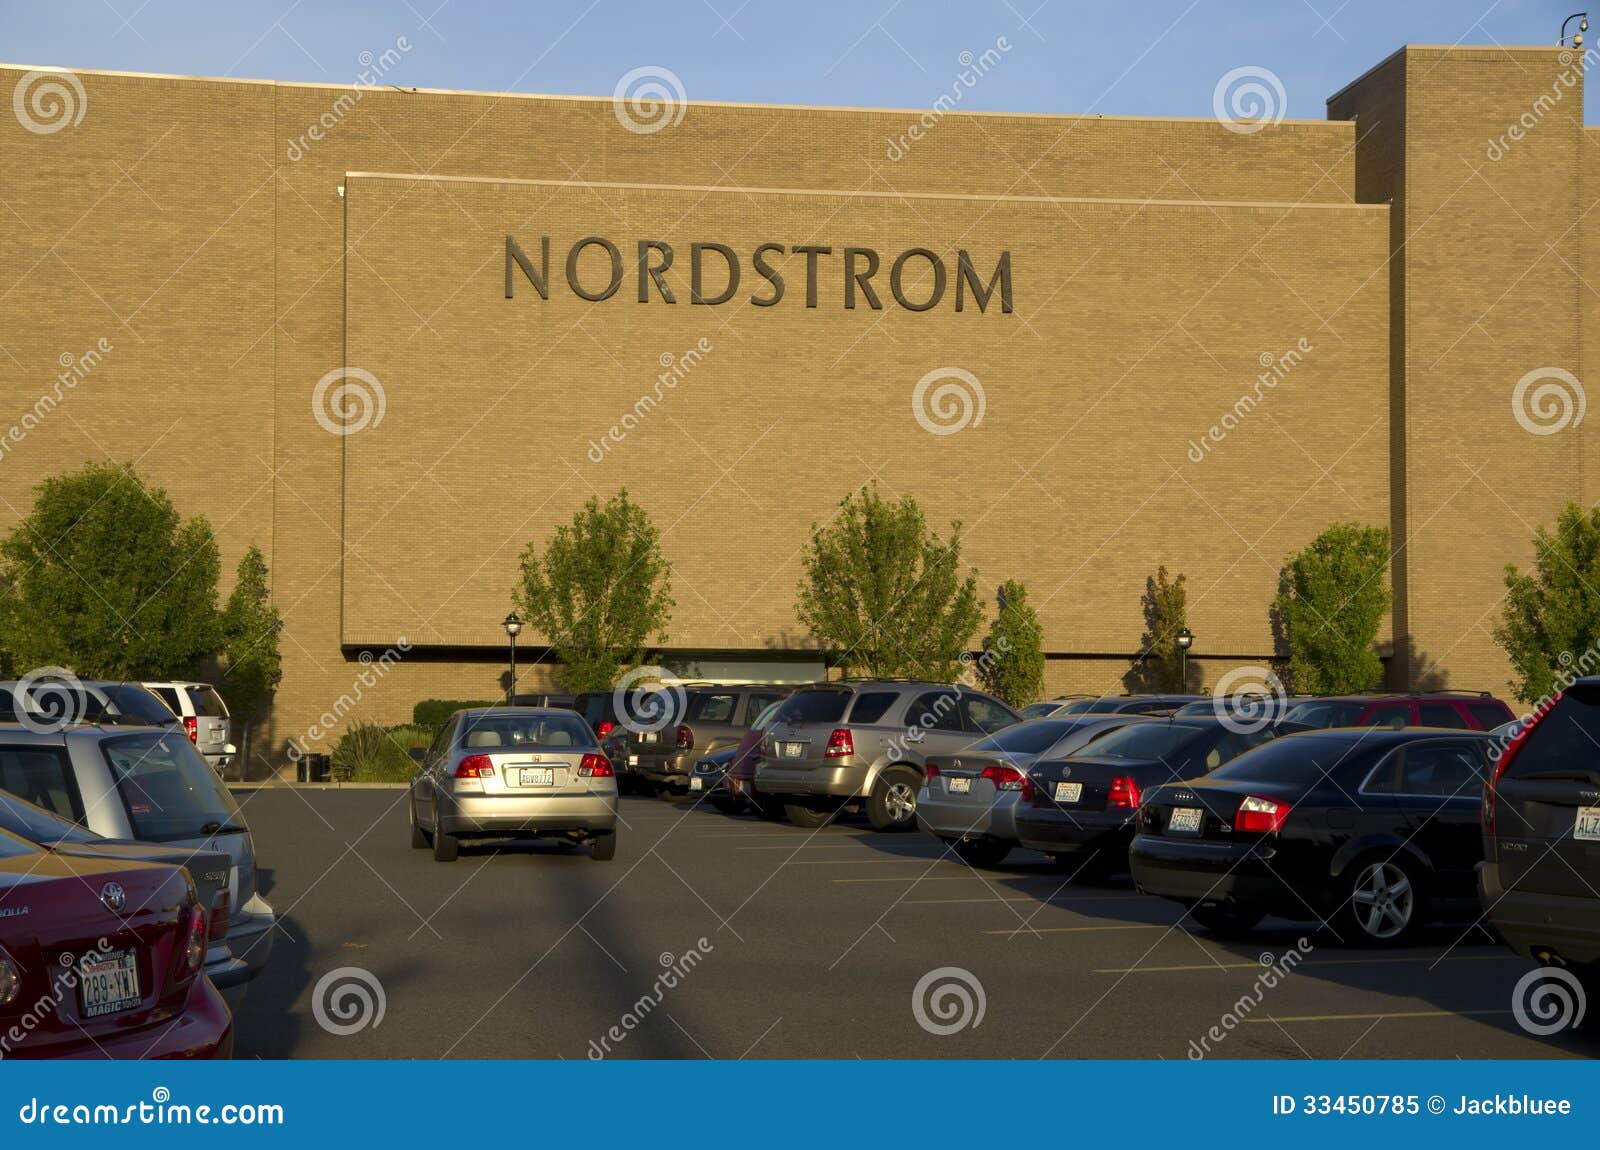 Exterior of Nordstrom department store at Northgate Mall Seattle.